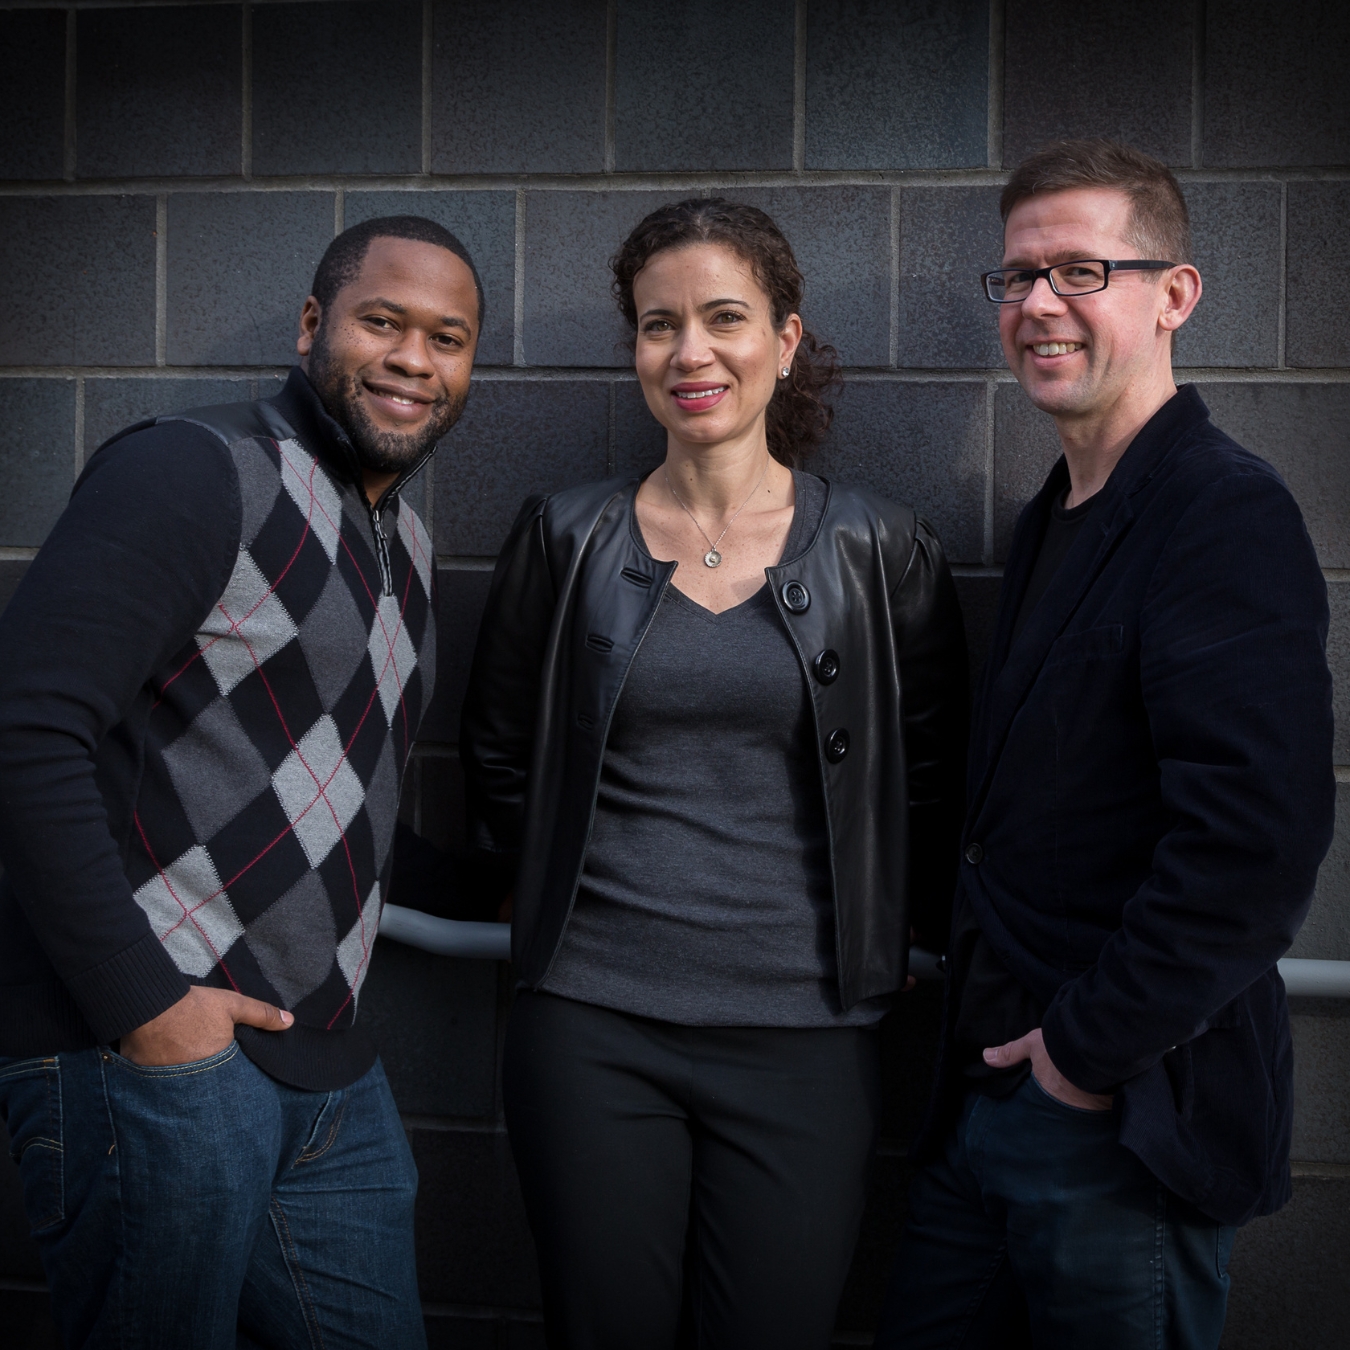 Three people smiling and posing in front of a wall.